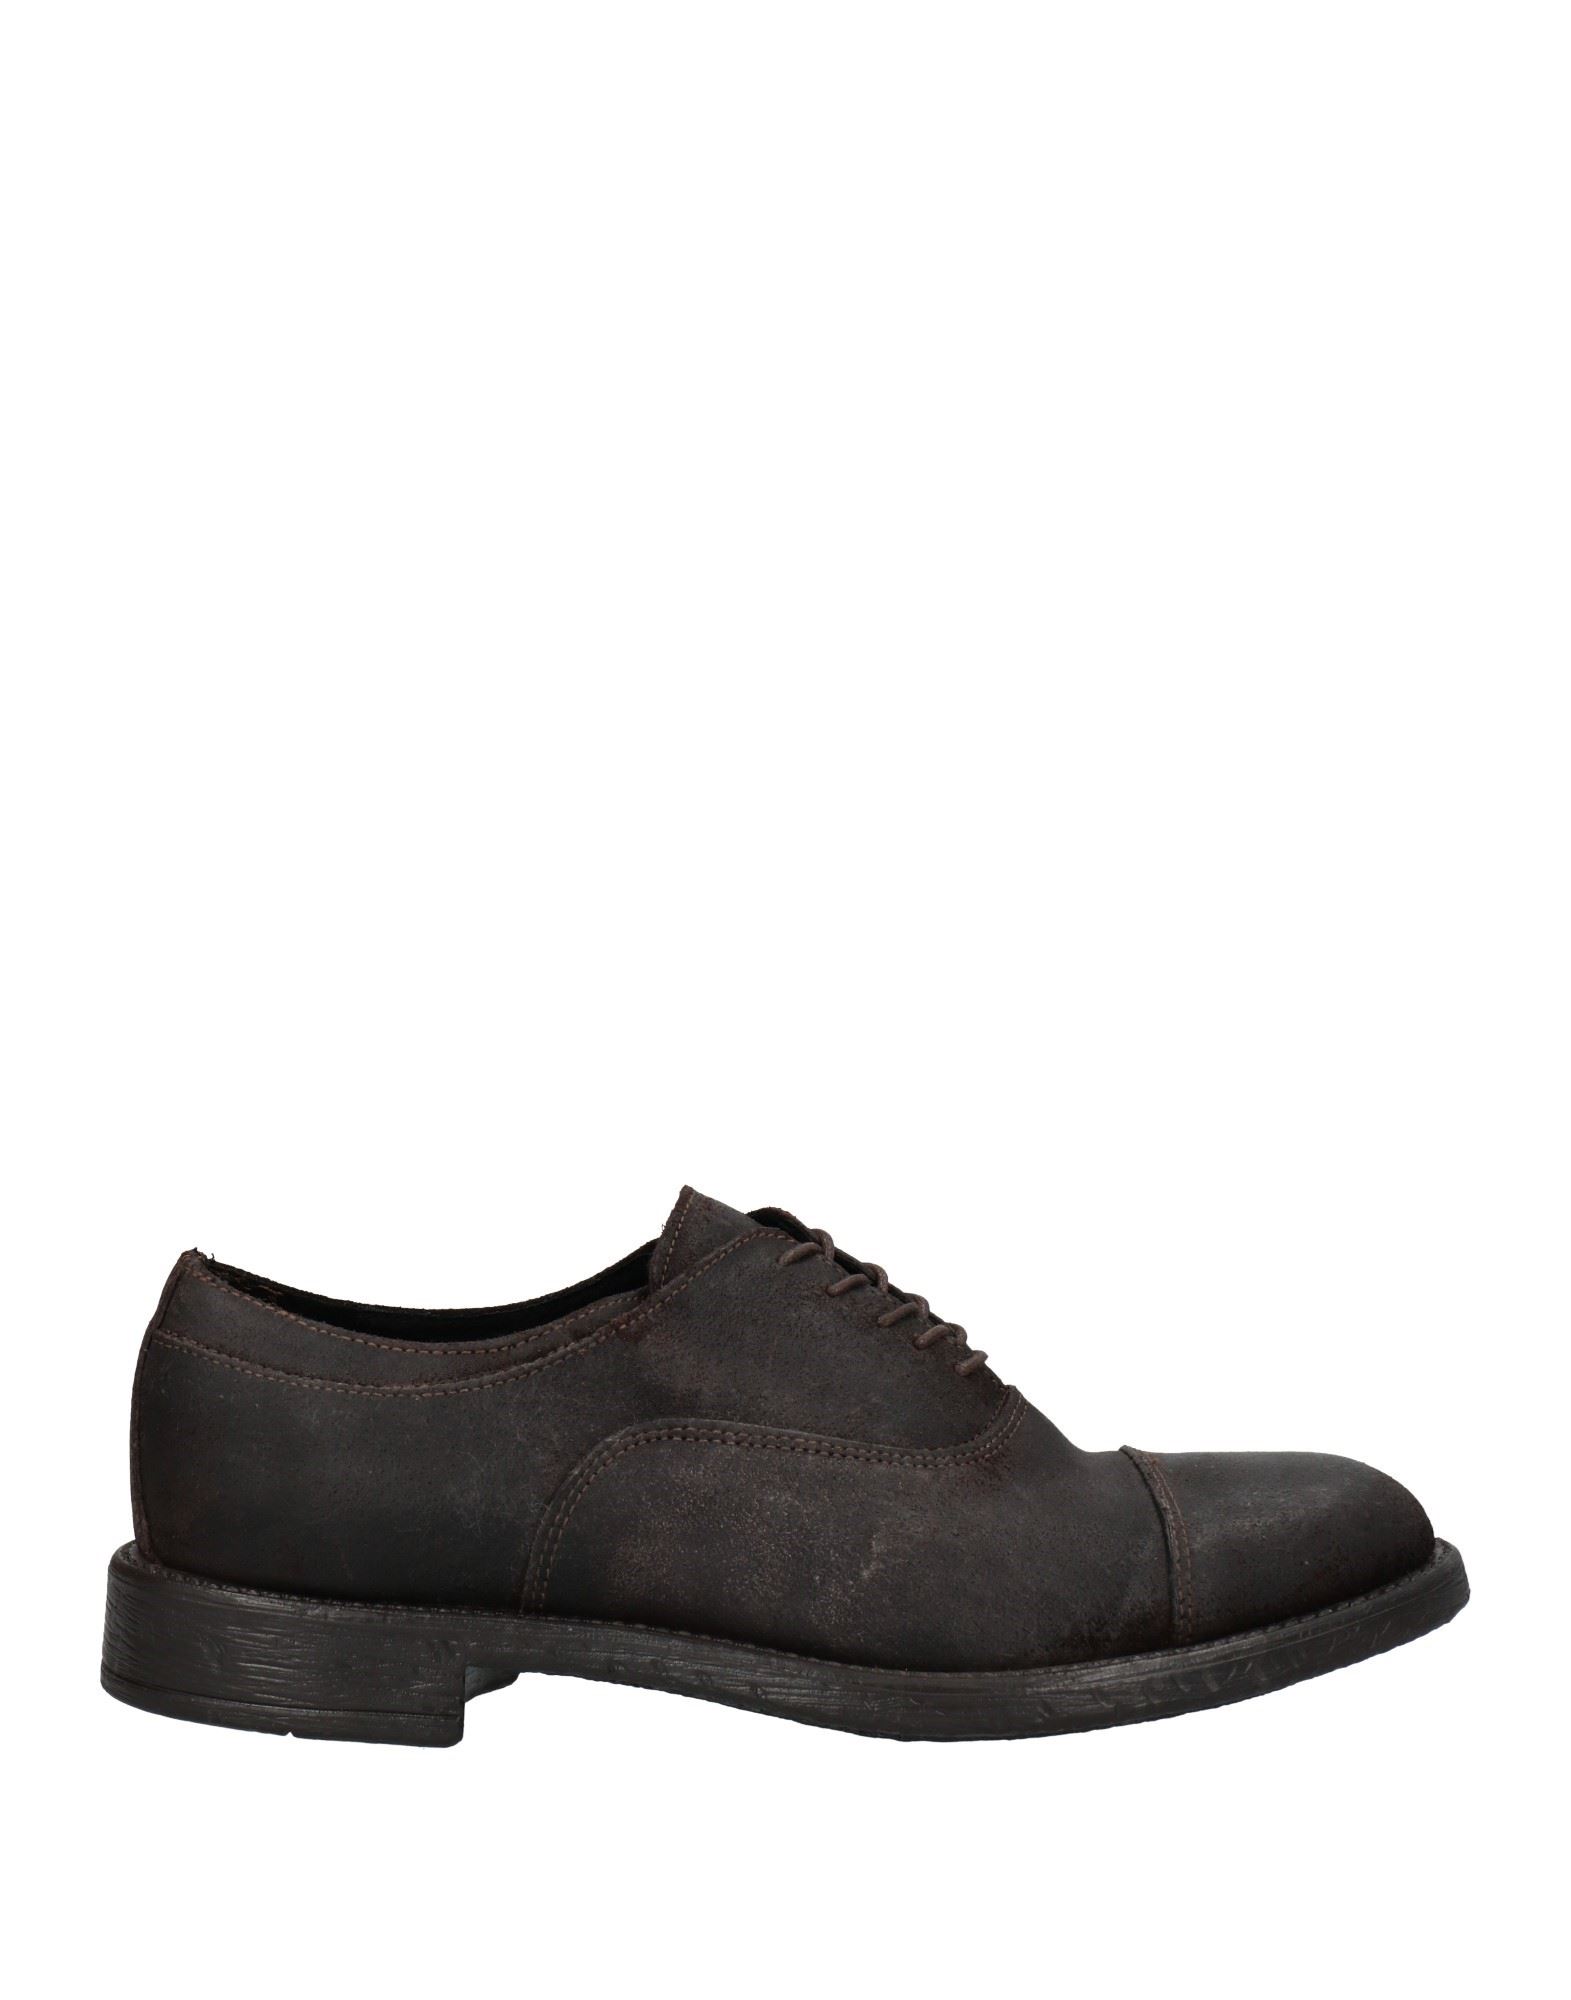 Daniele Alessandrini Homme Lace-up Shoes In Dark Brown